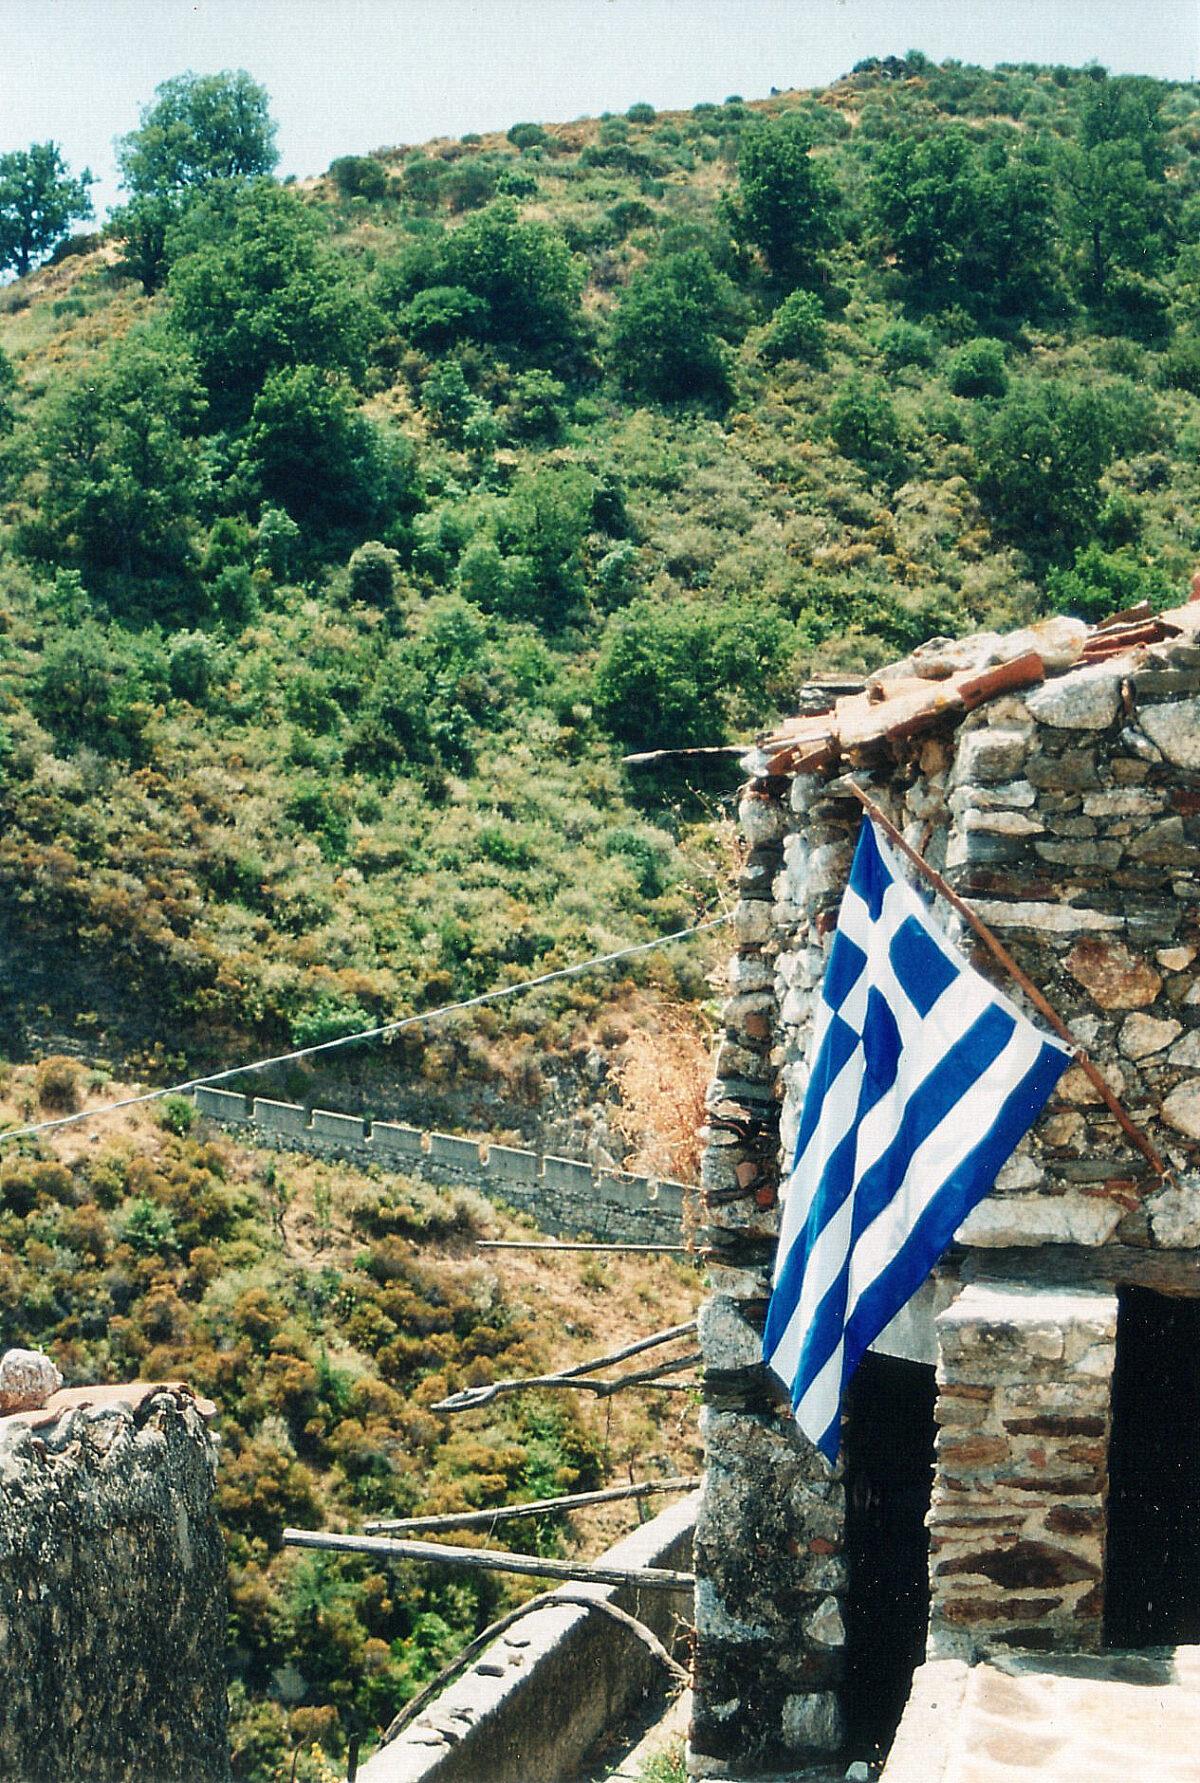 A Greek flag hanging from a home in Gallicianò. (Kevin Revolinski)